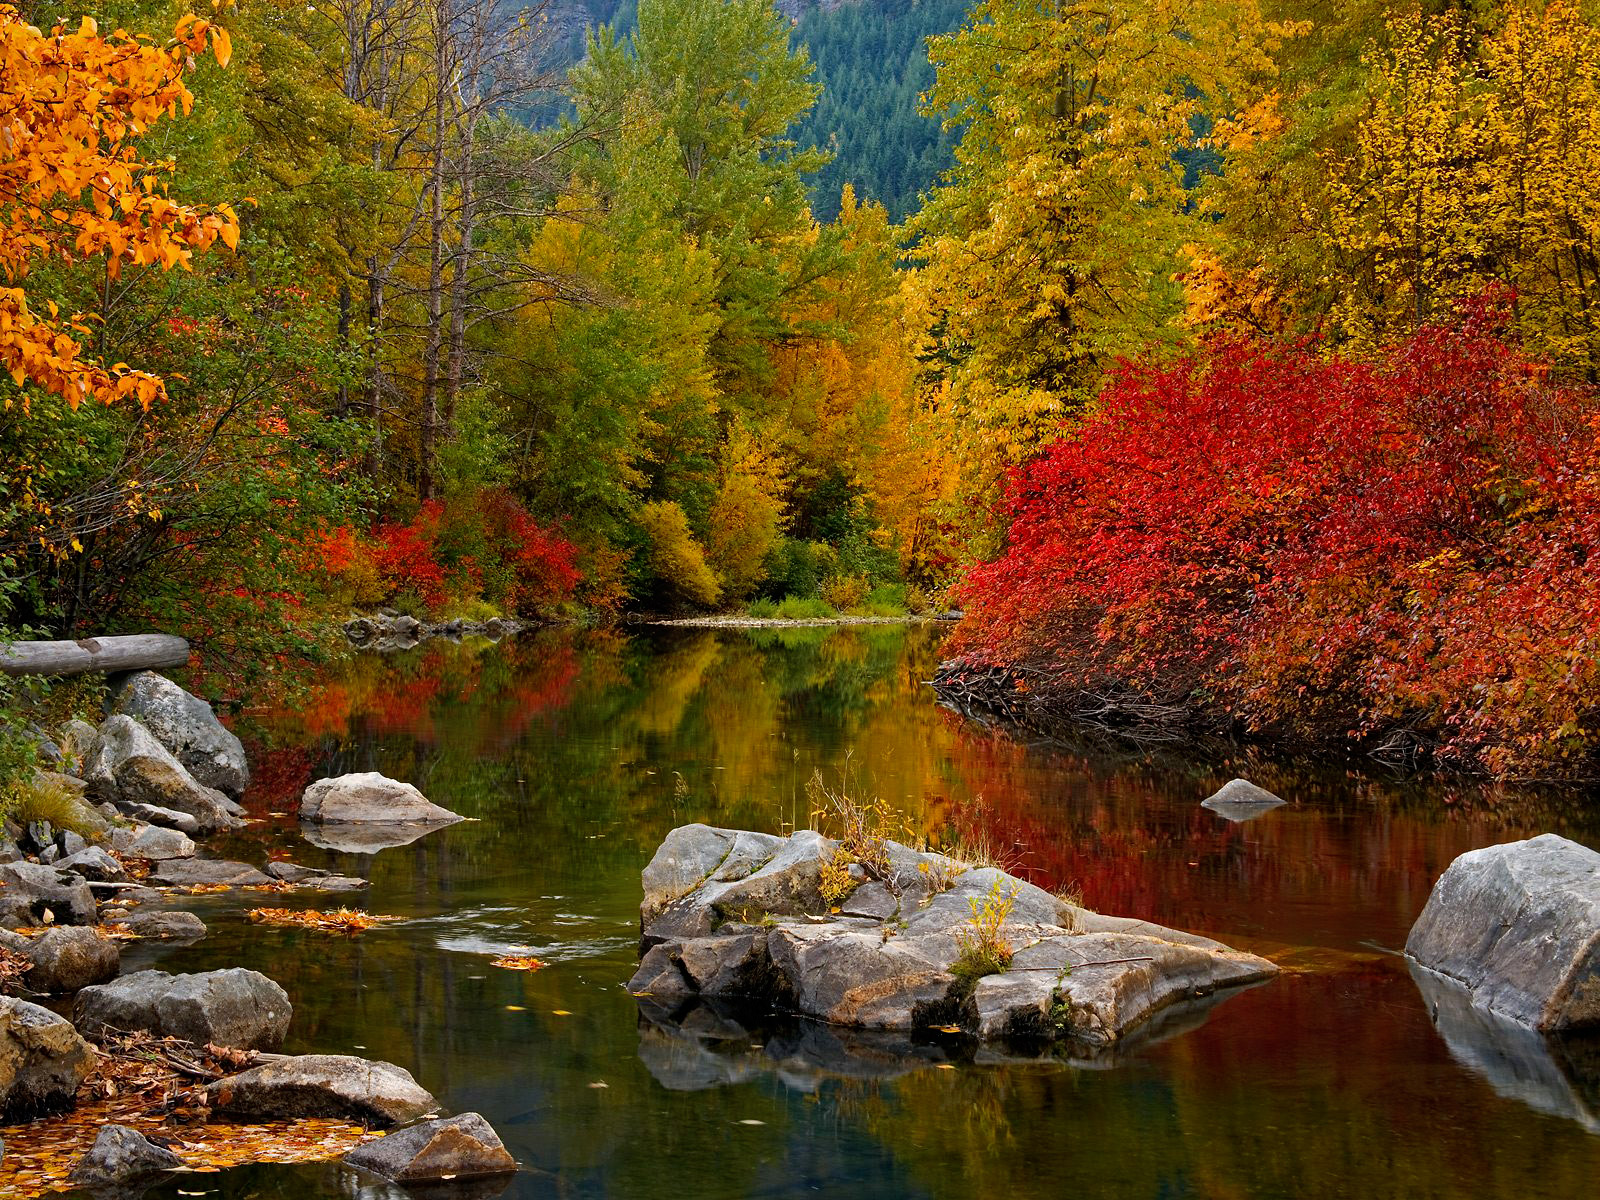  bio bing autumn wallpapers this bing wallpaper images autumn and 1600x1200